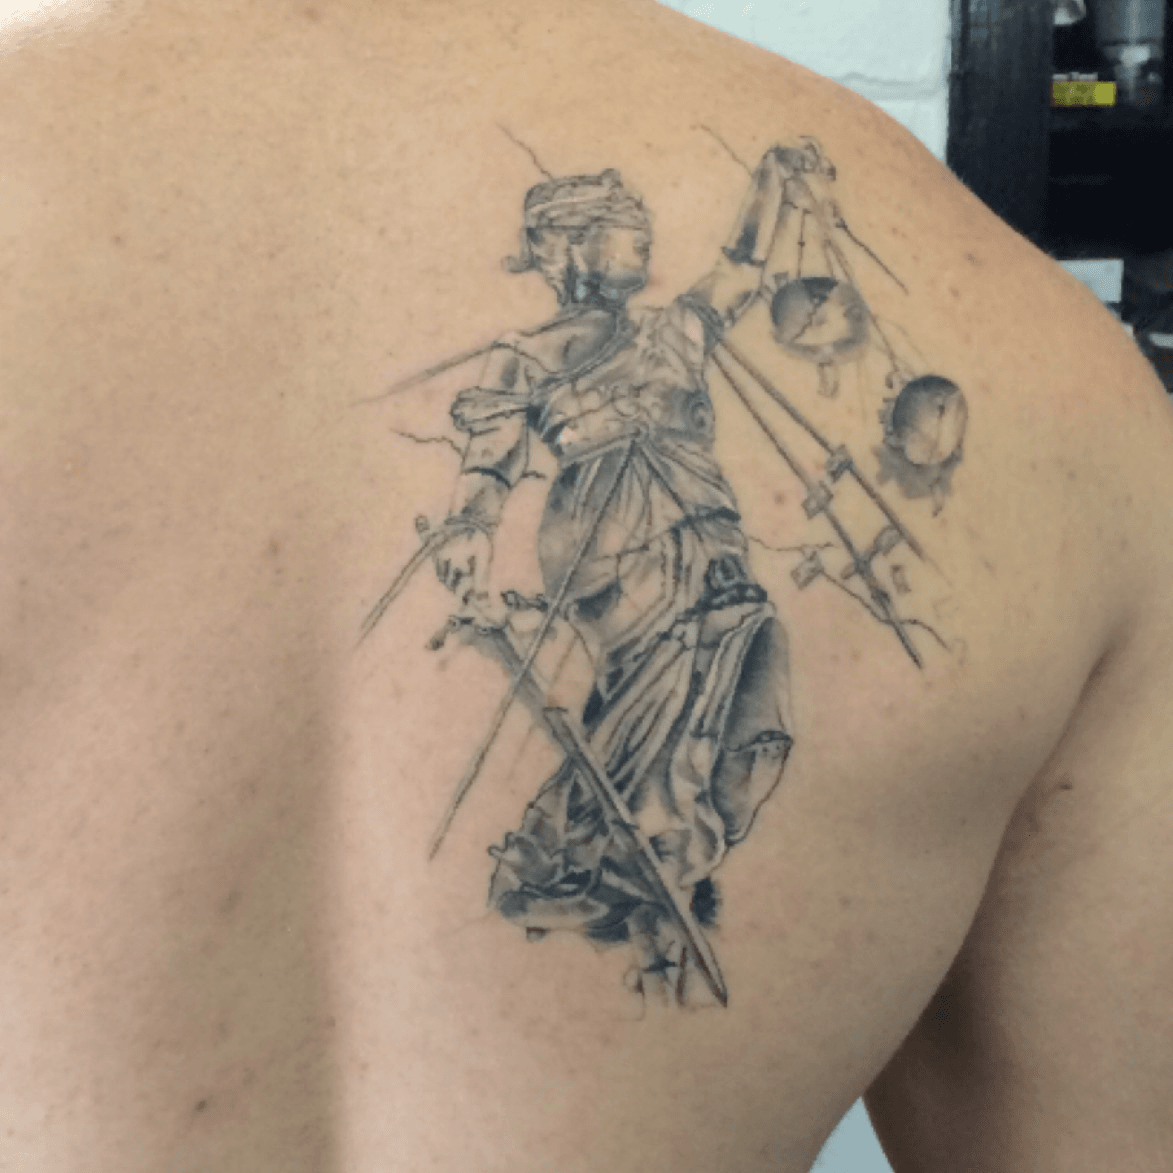 Tattoo uploaded by MarsHendrixTattoo  and justice for all  Tattoodo